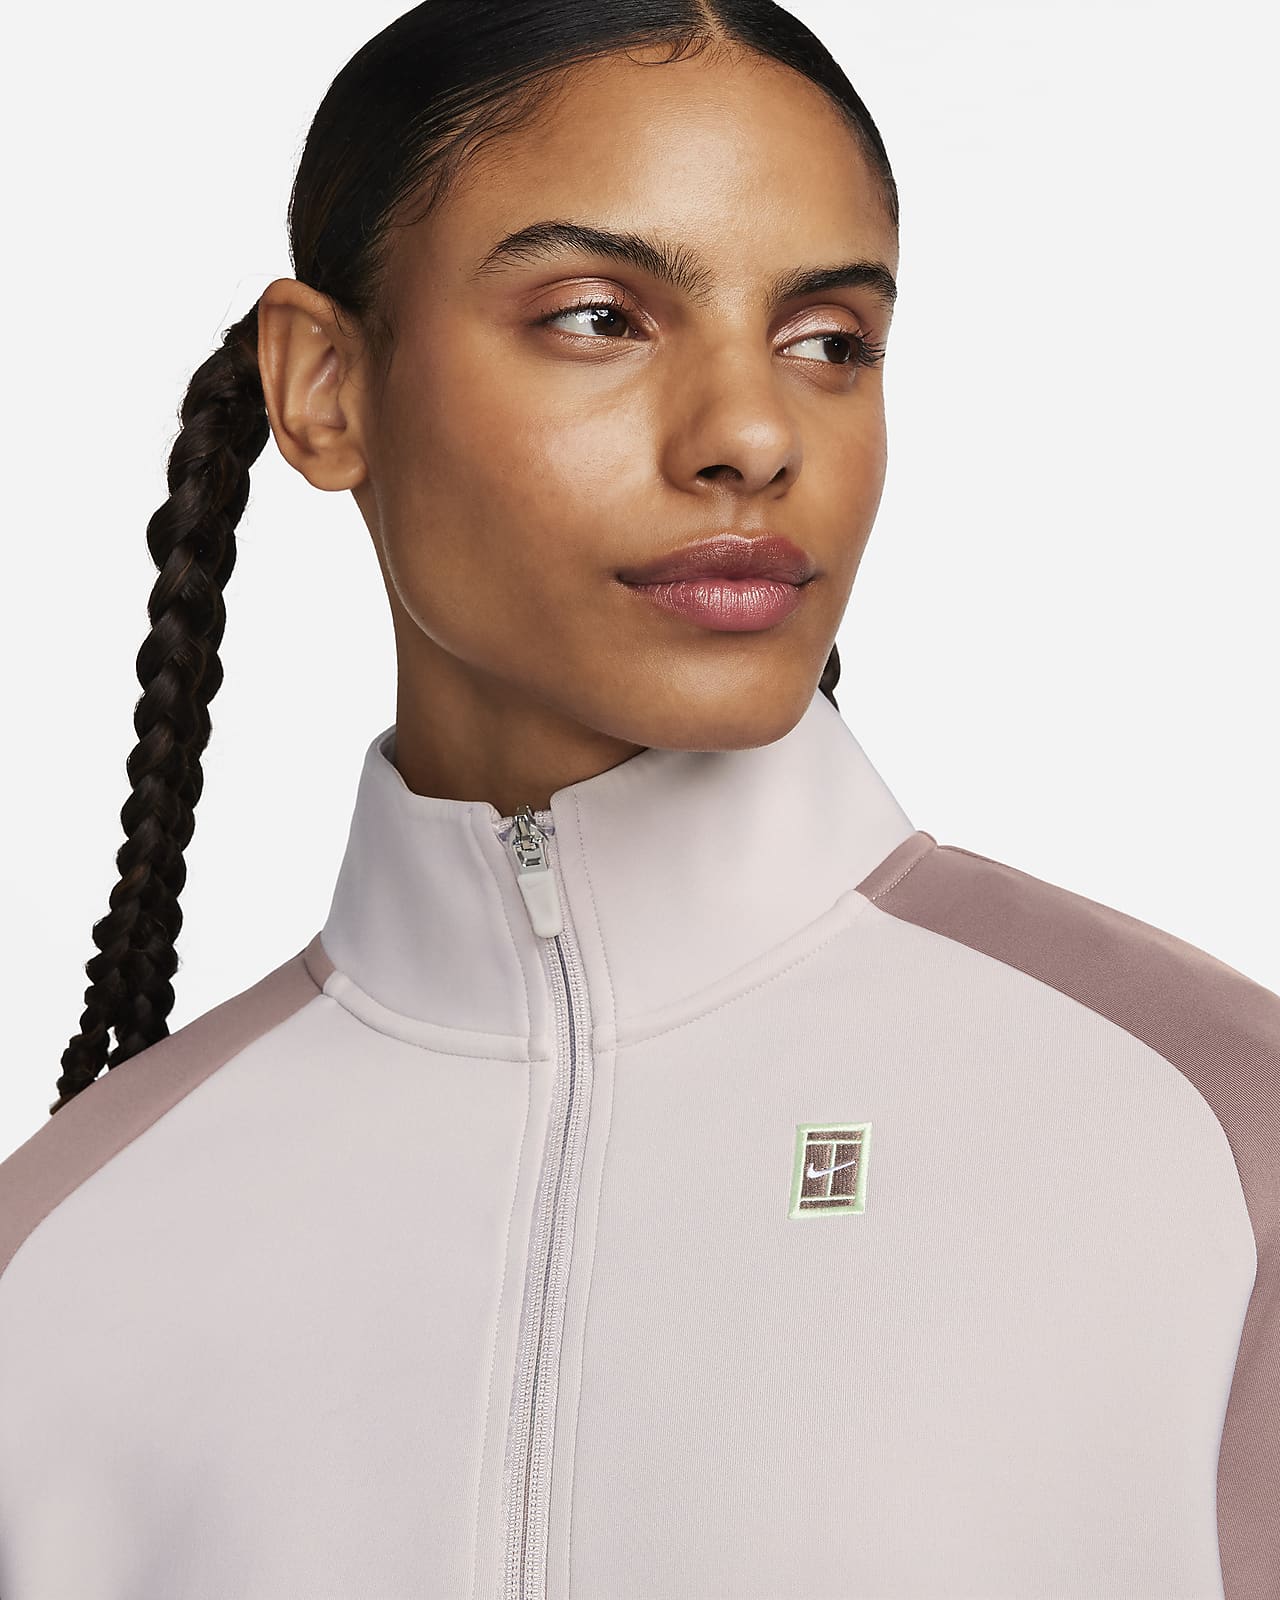 https://static.nike.com/a/images/t_PDP_1280_v1/f_auto,q_auto:eco/1efa5db3-e7d0-443a-b63c-9bf9a9c51797/nikecourt-womens-full-zip-tennis-jacket-GzPD7K.png